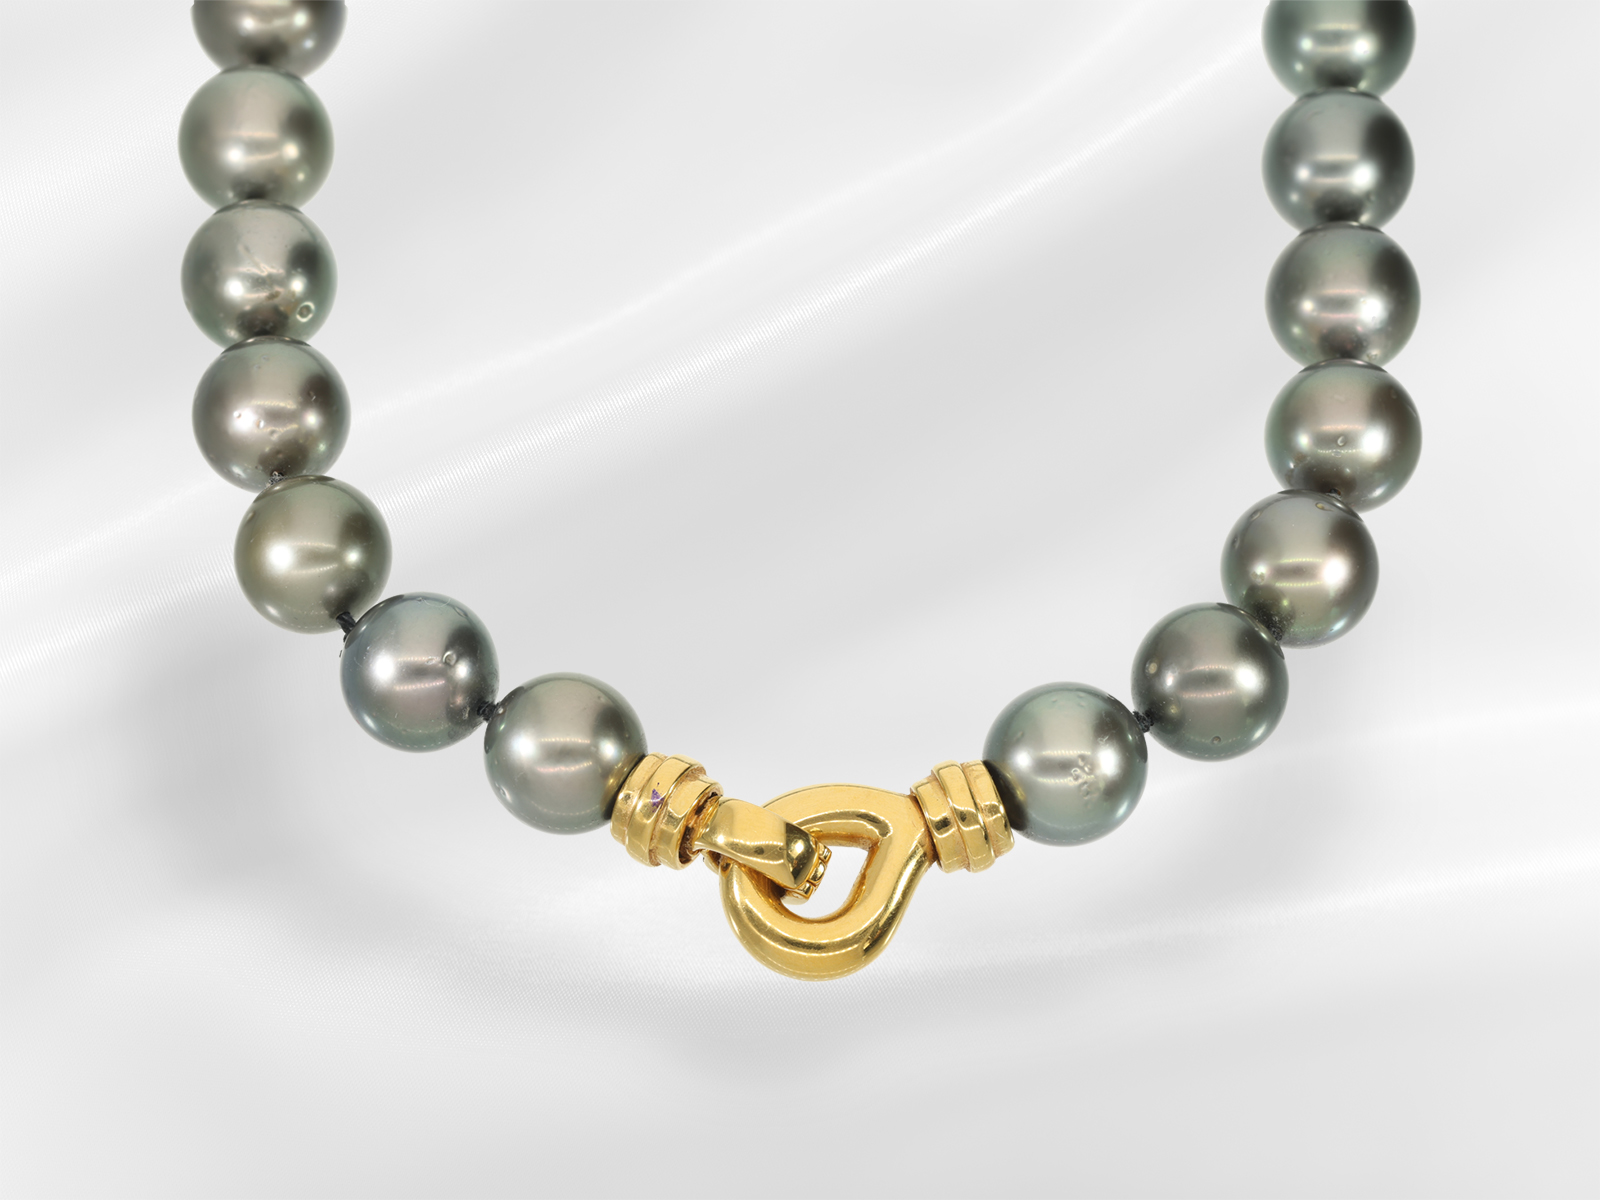 Necklace: formerly very expensive Tahitian pearl necklace 12-15mm!, original price approx. 13,000€,  - Image 3 of 6